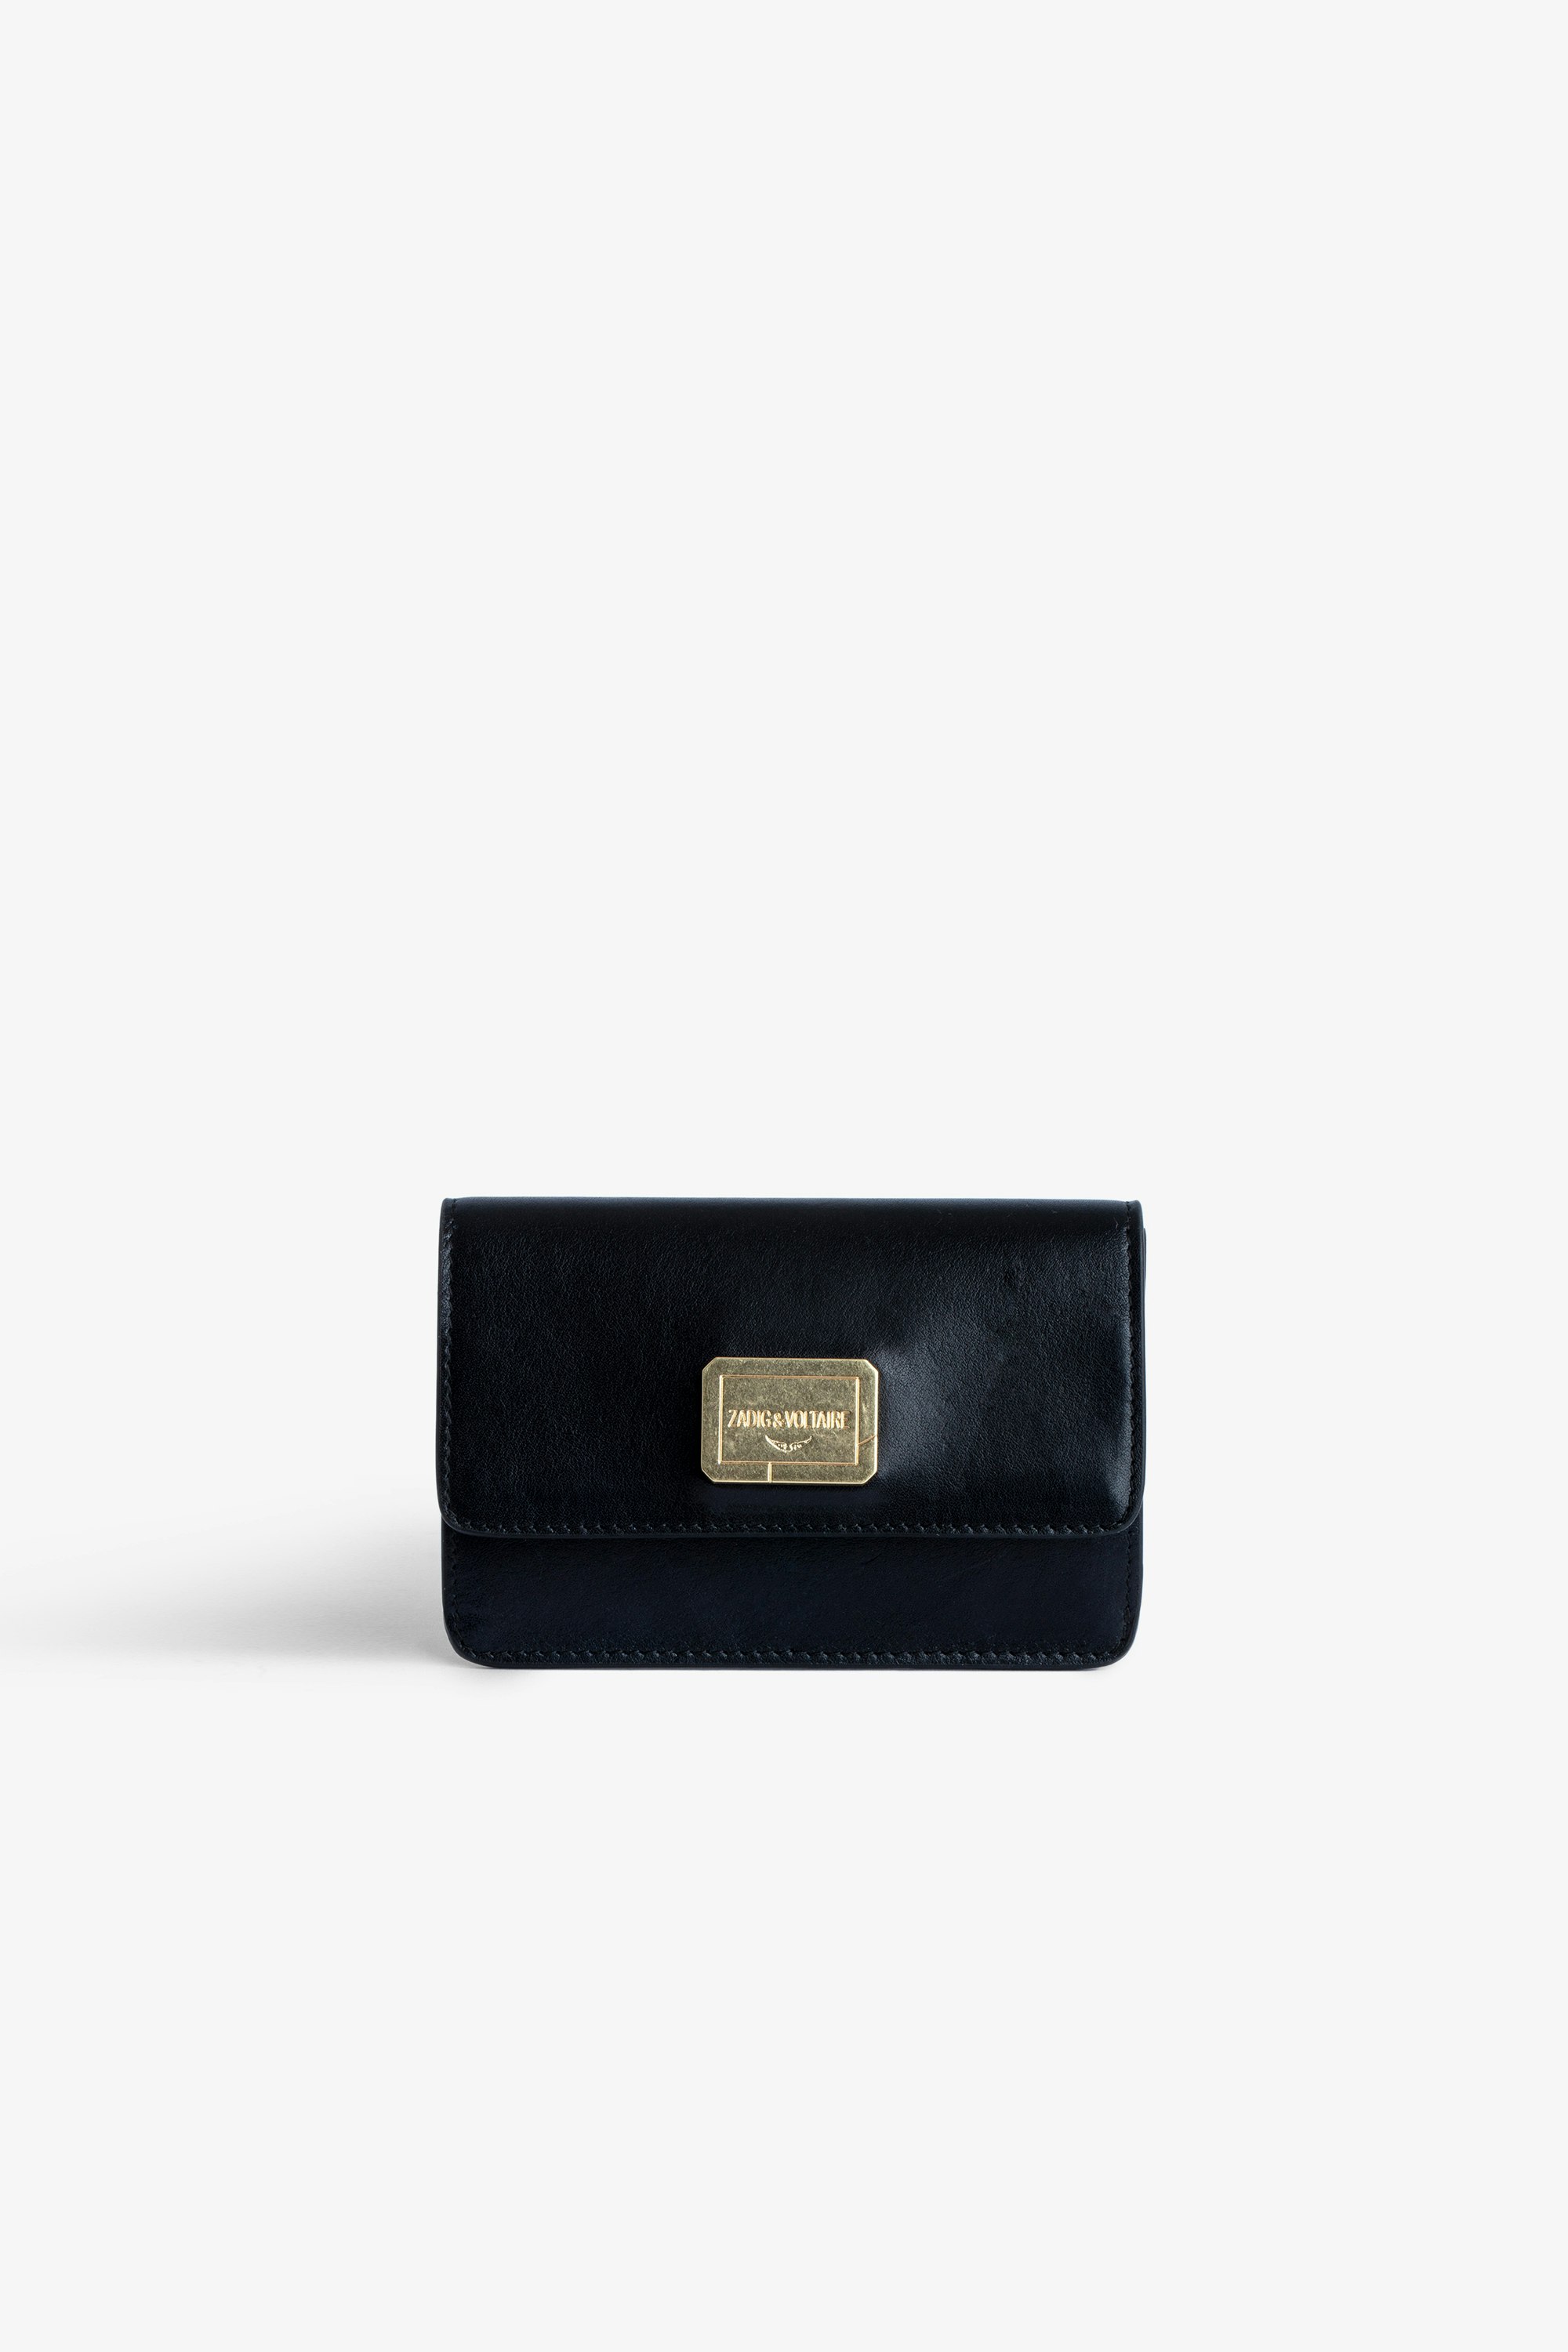 Le Cecilia 財布 Women's navy blue leather wallet with flap 